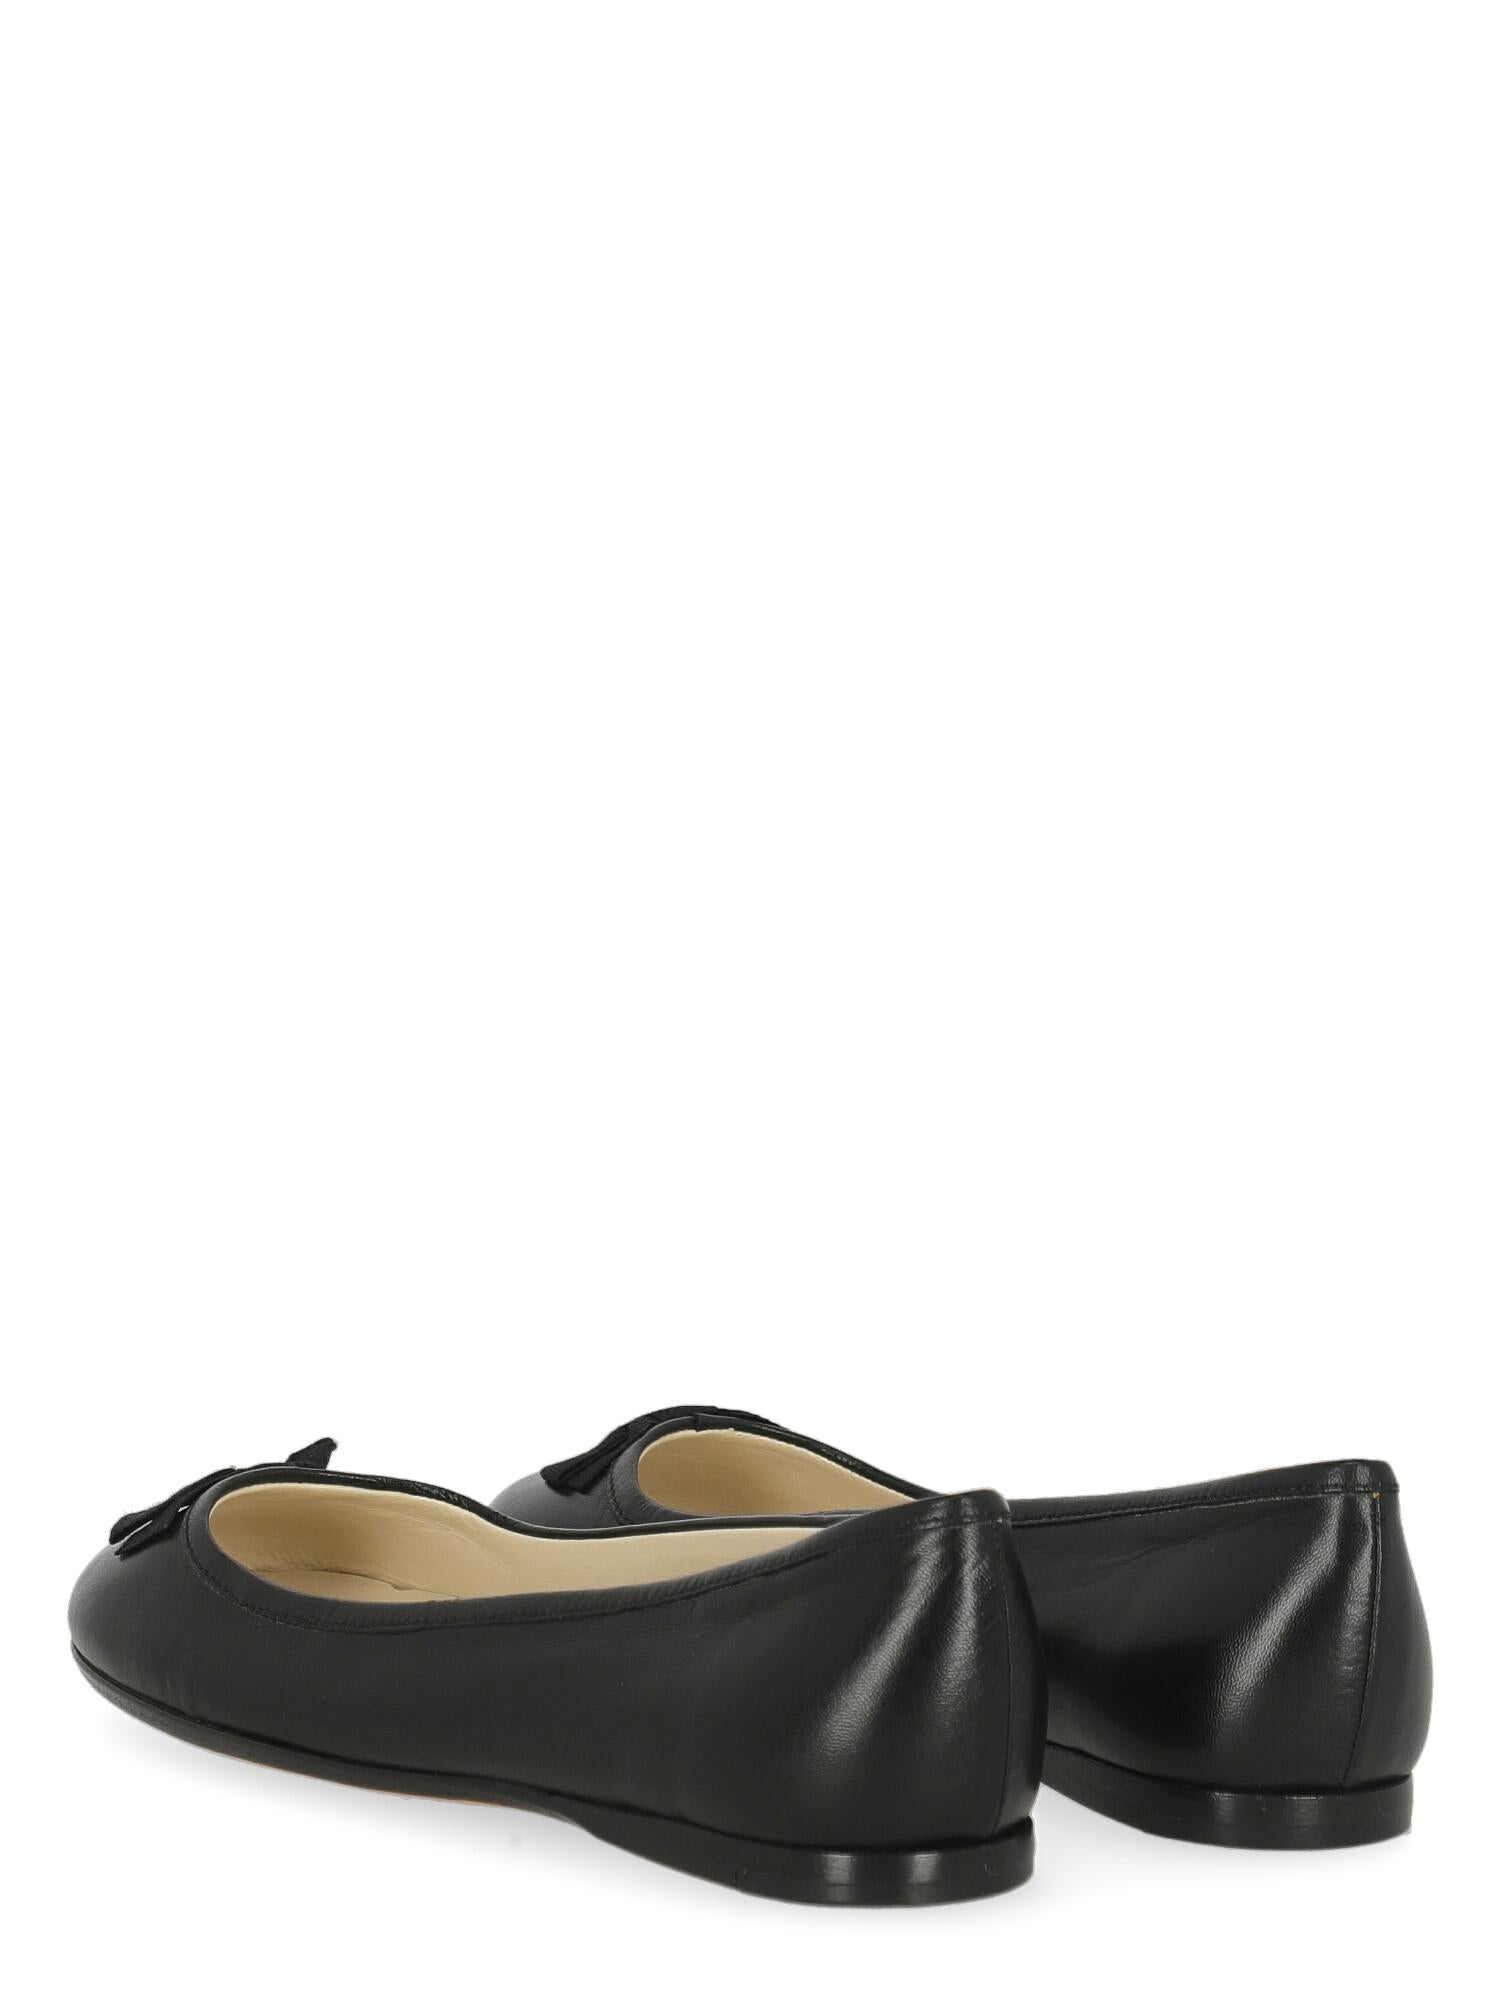 Miu Miu Women Ballet flats Black Leather EU 35 In Excellent Condition For Sale In Milan, IT